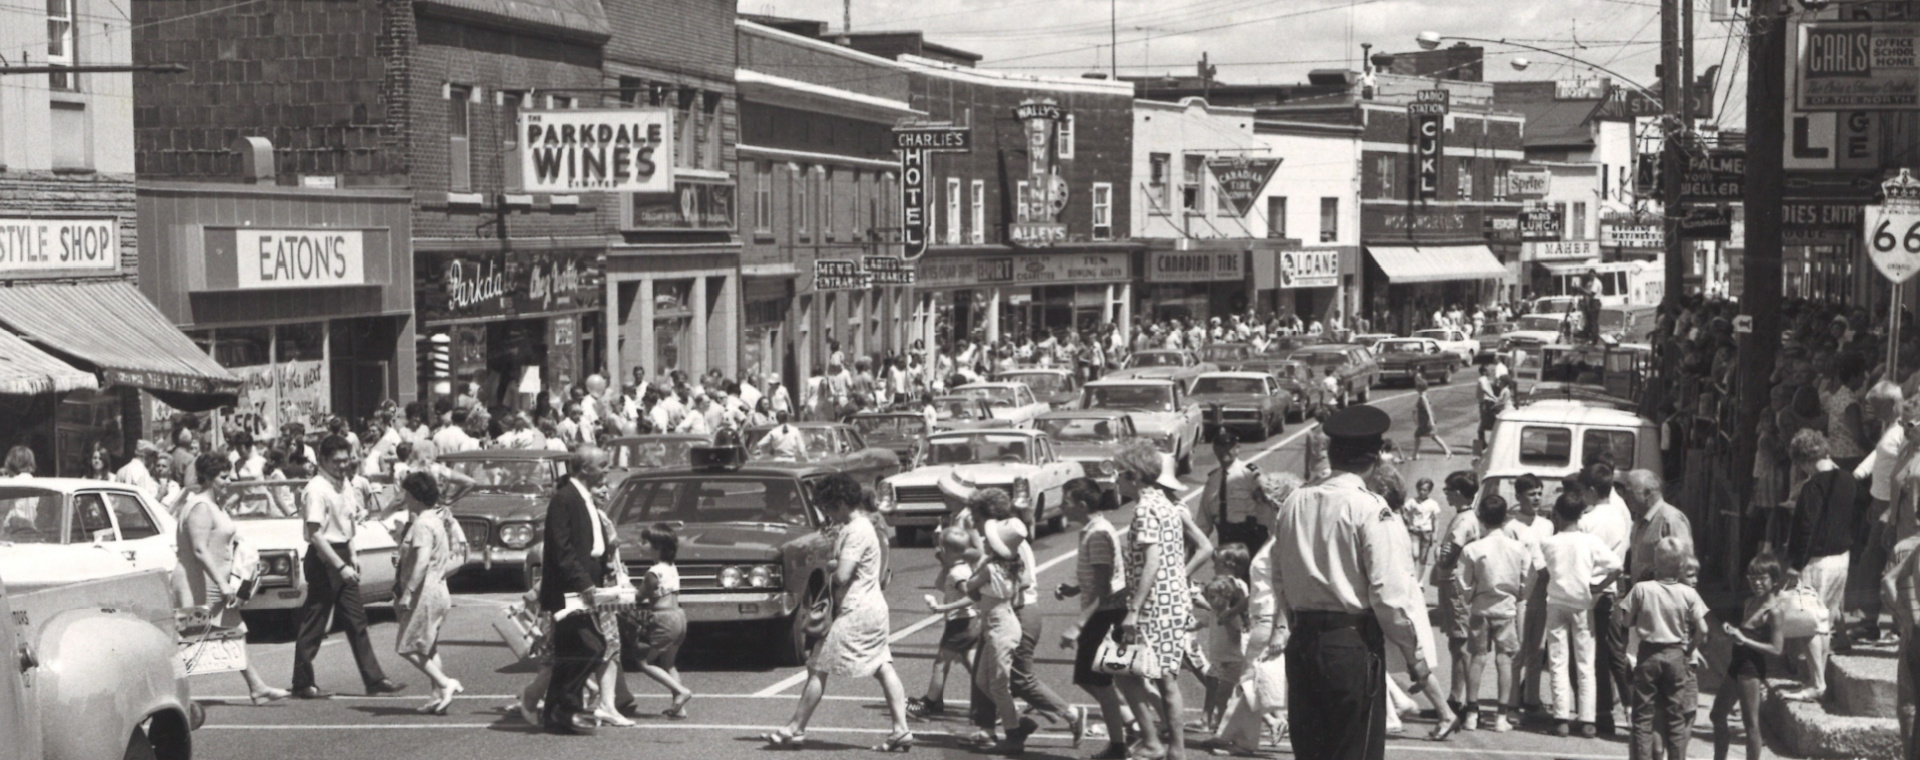 Black and white photograph of a busy street. A policeman directs traffic in the foreground while people cross the street. Cars line the street and businesses are in the background. A banner hangs over the street.